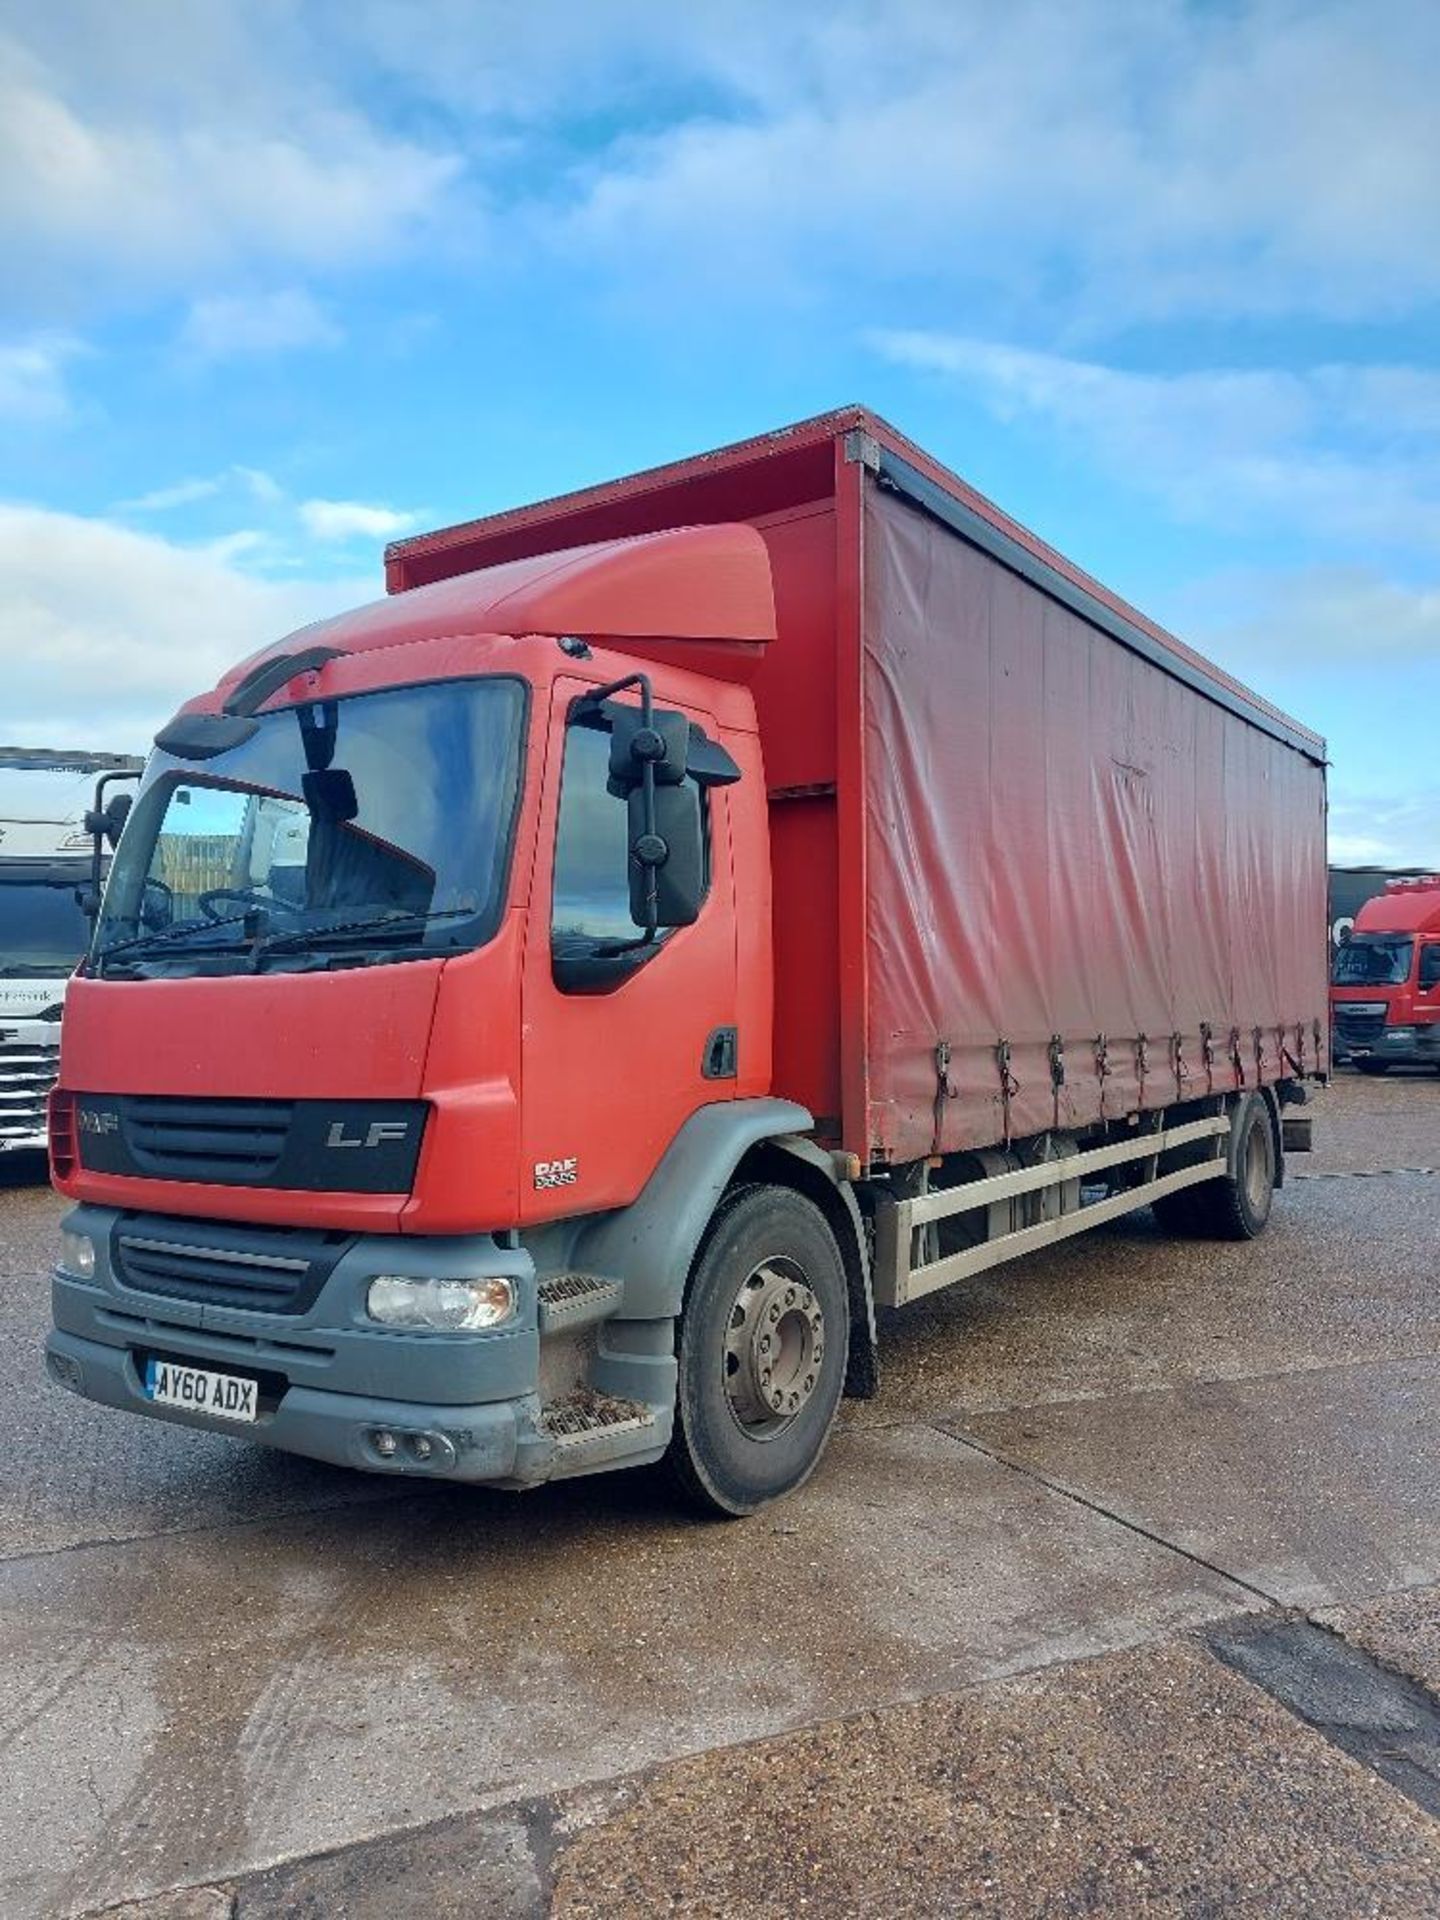 DAF L55.250 4x2 Rigid 18T Curtain Side Lorry with Tail Lift - Image 2 of 10